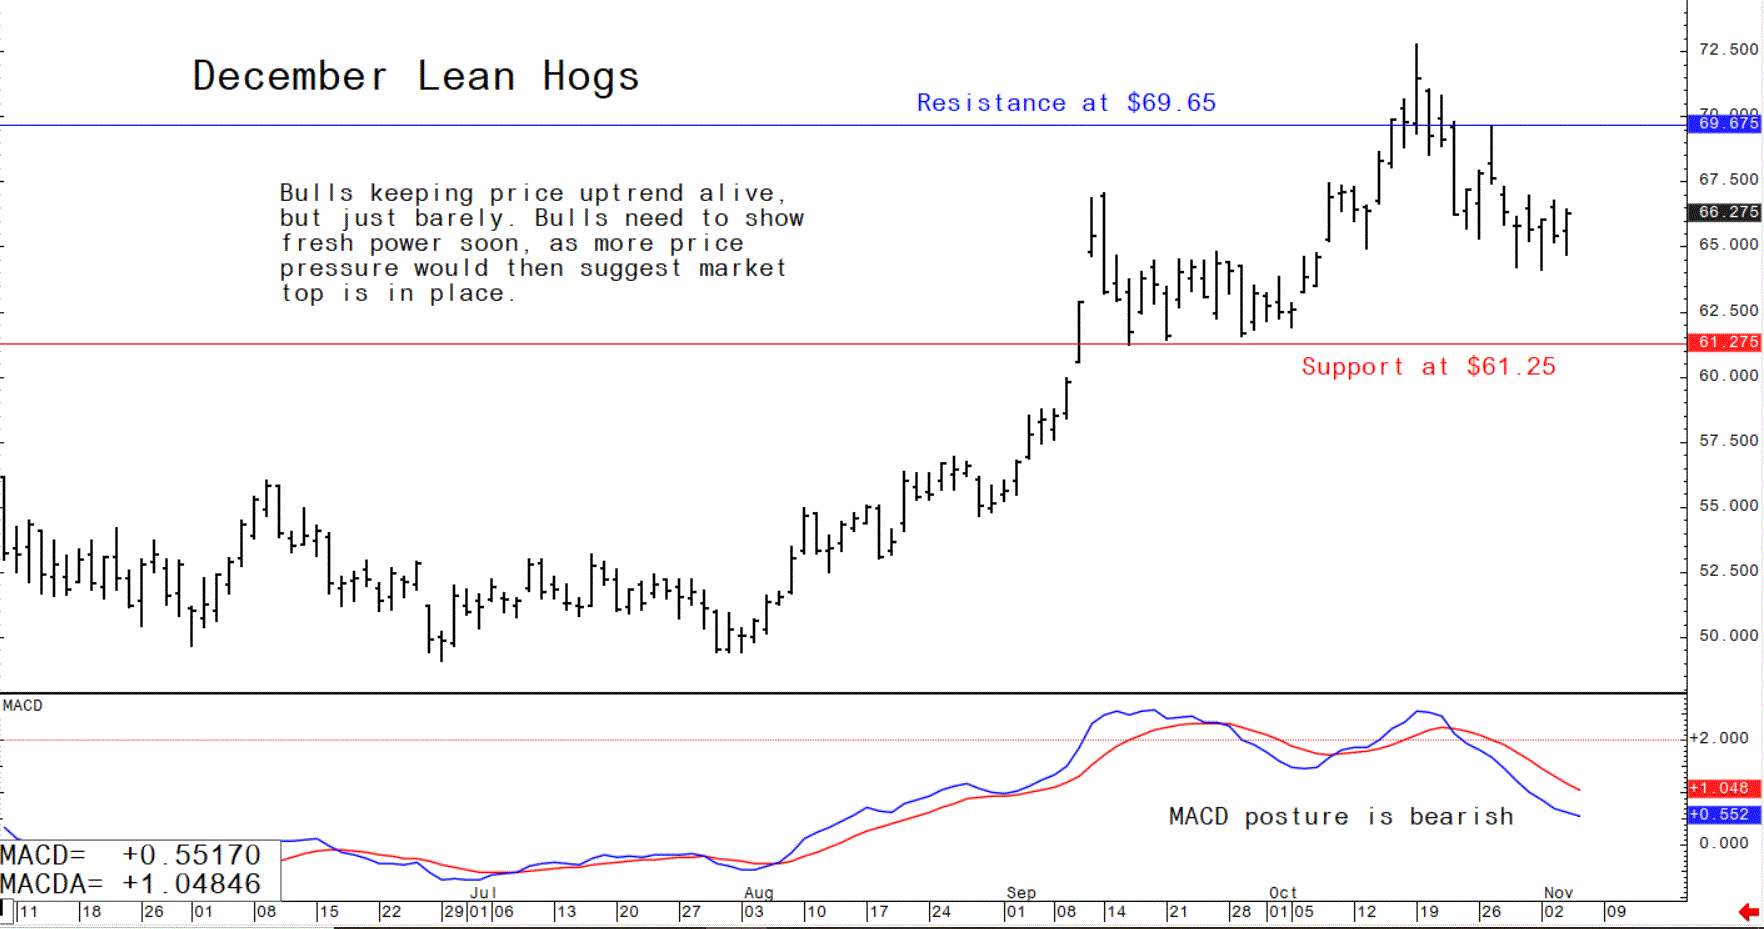 Chart showing the trajectory of US December lean hog futures